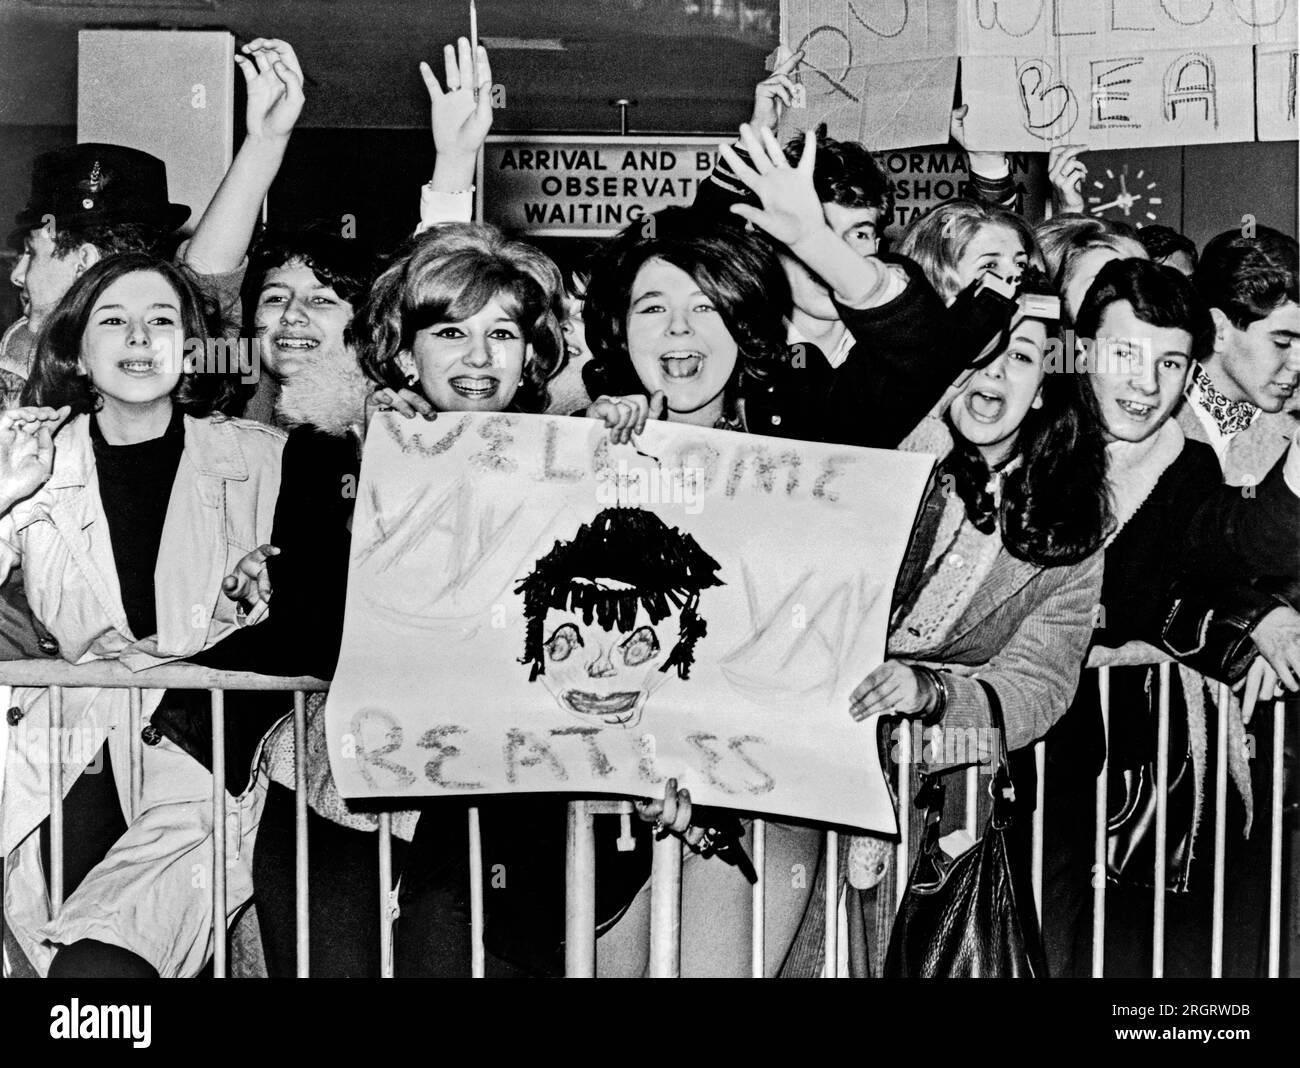 New York, New York:  February 7, 1964. Screaming teenagers wave a crude sign as they welcome 'The Beatles' - Britain's shaggy-haired rock n' roll singers - upon their arrival at New York's John F. Kennedy Airport. Stock Photo